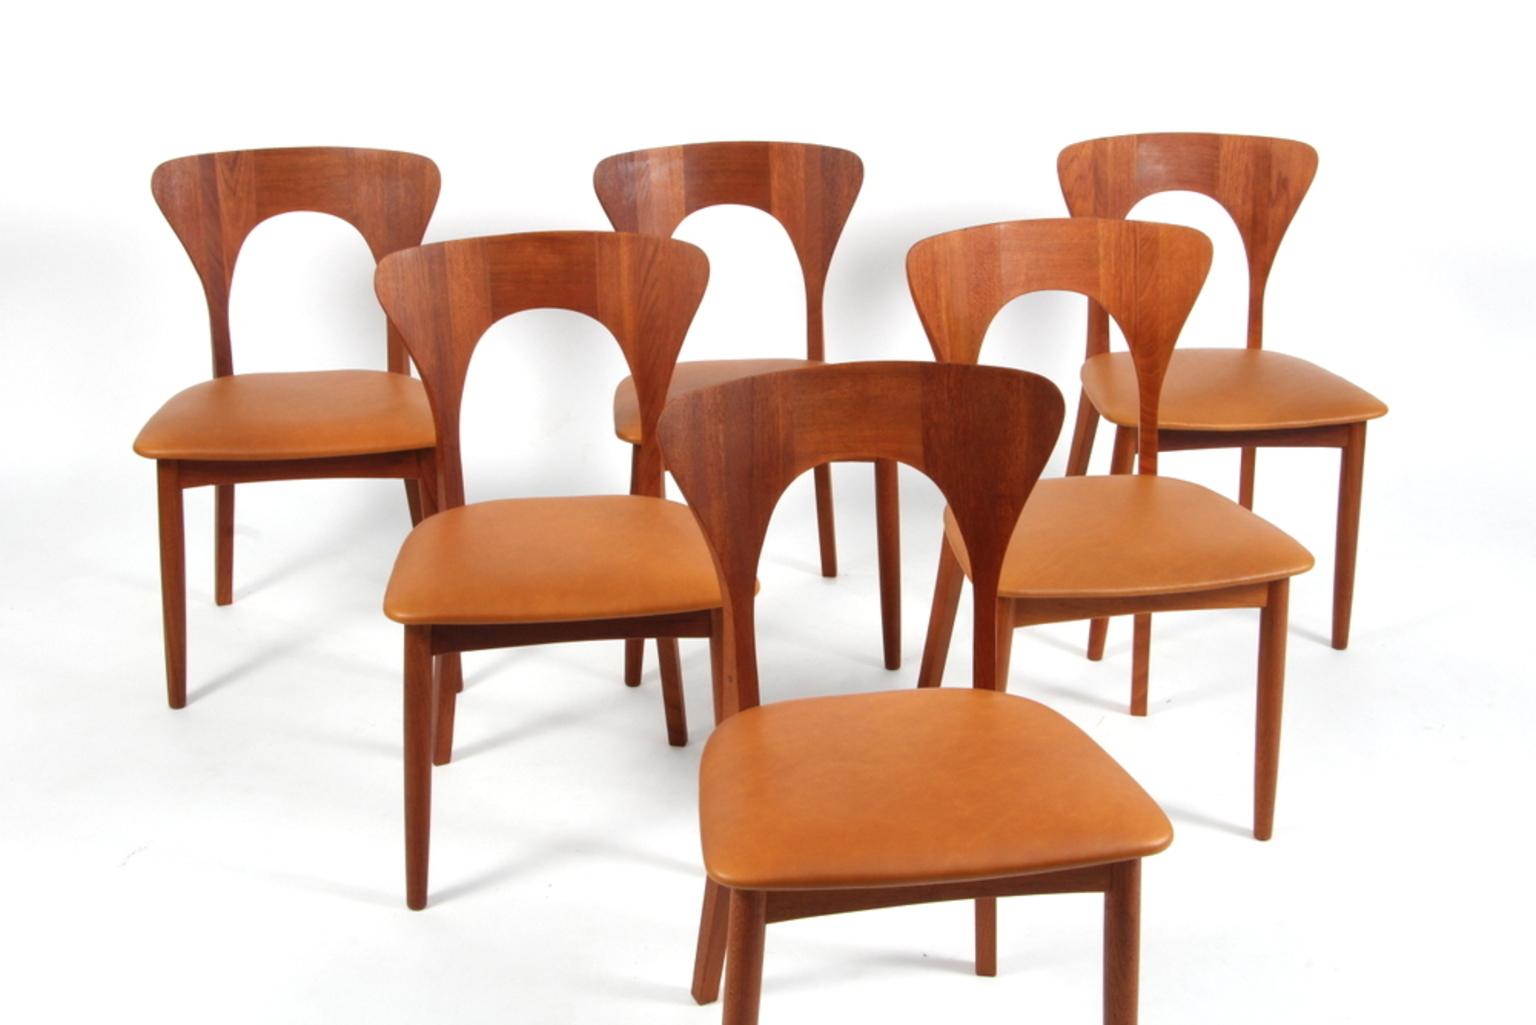 Set of six Niels Koefoed dining chairs in massive teak.

New upholstered with silk aniline leather from camo.

Made by Koefoeds Møbelfabrik.